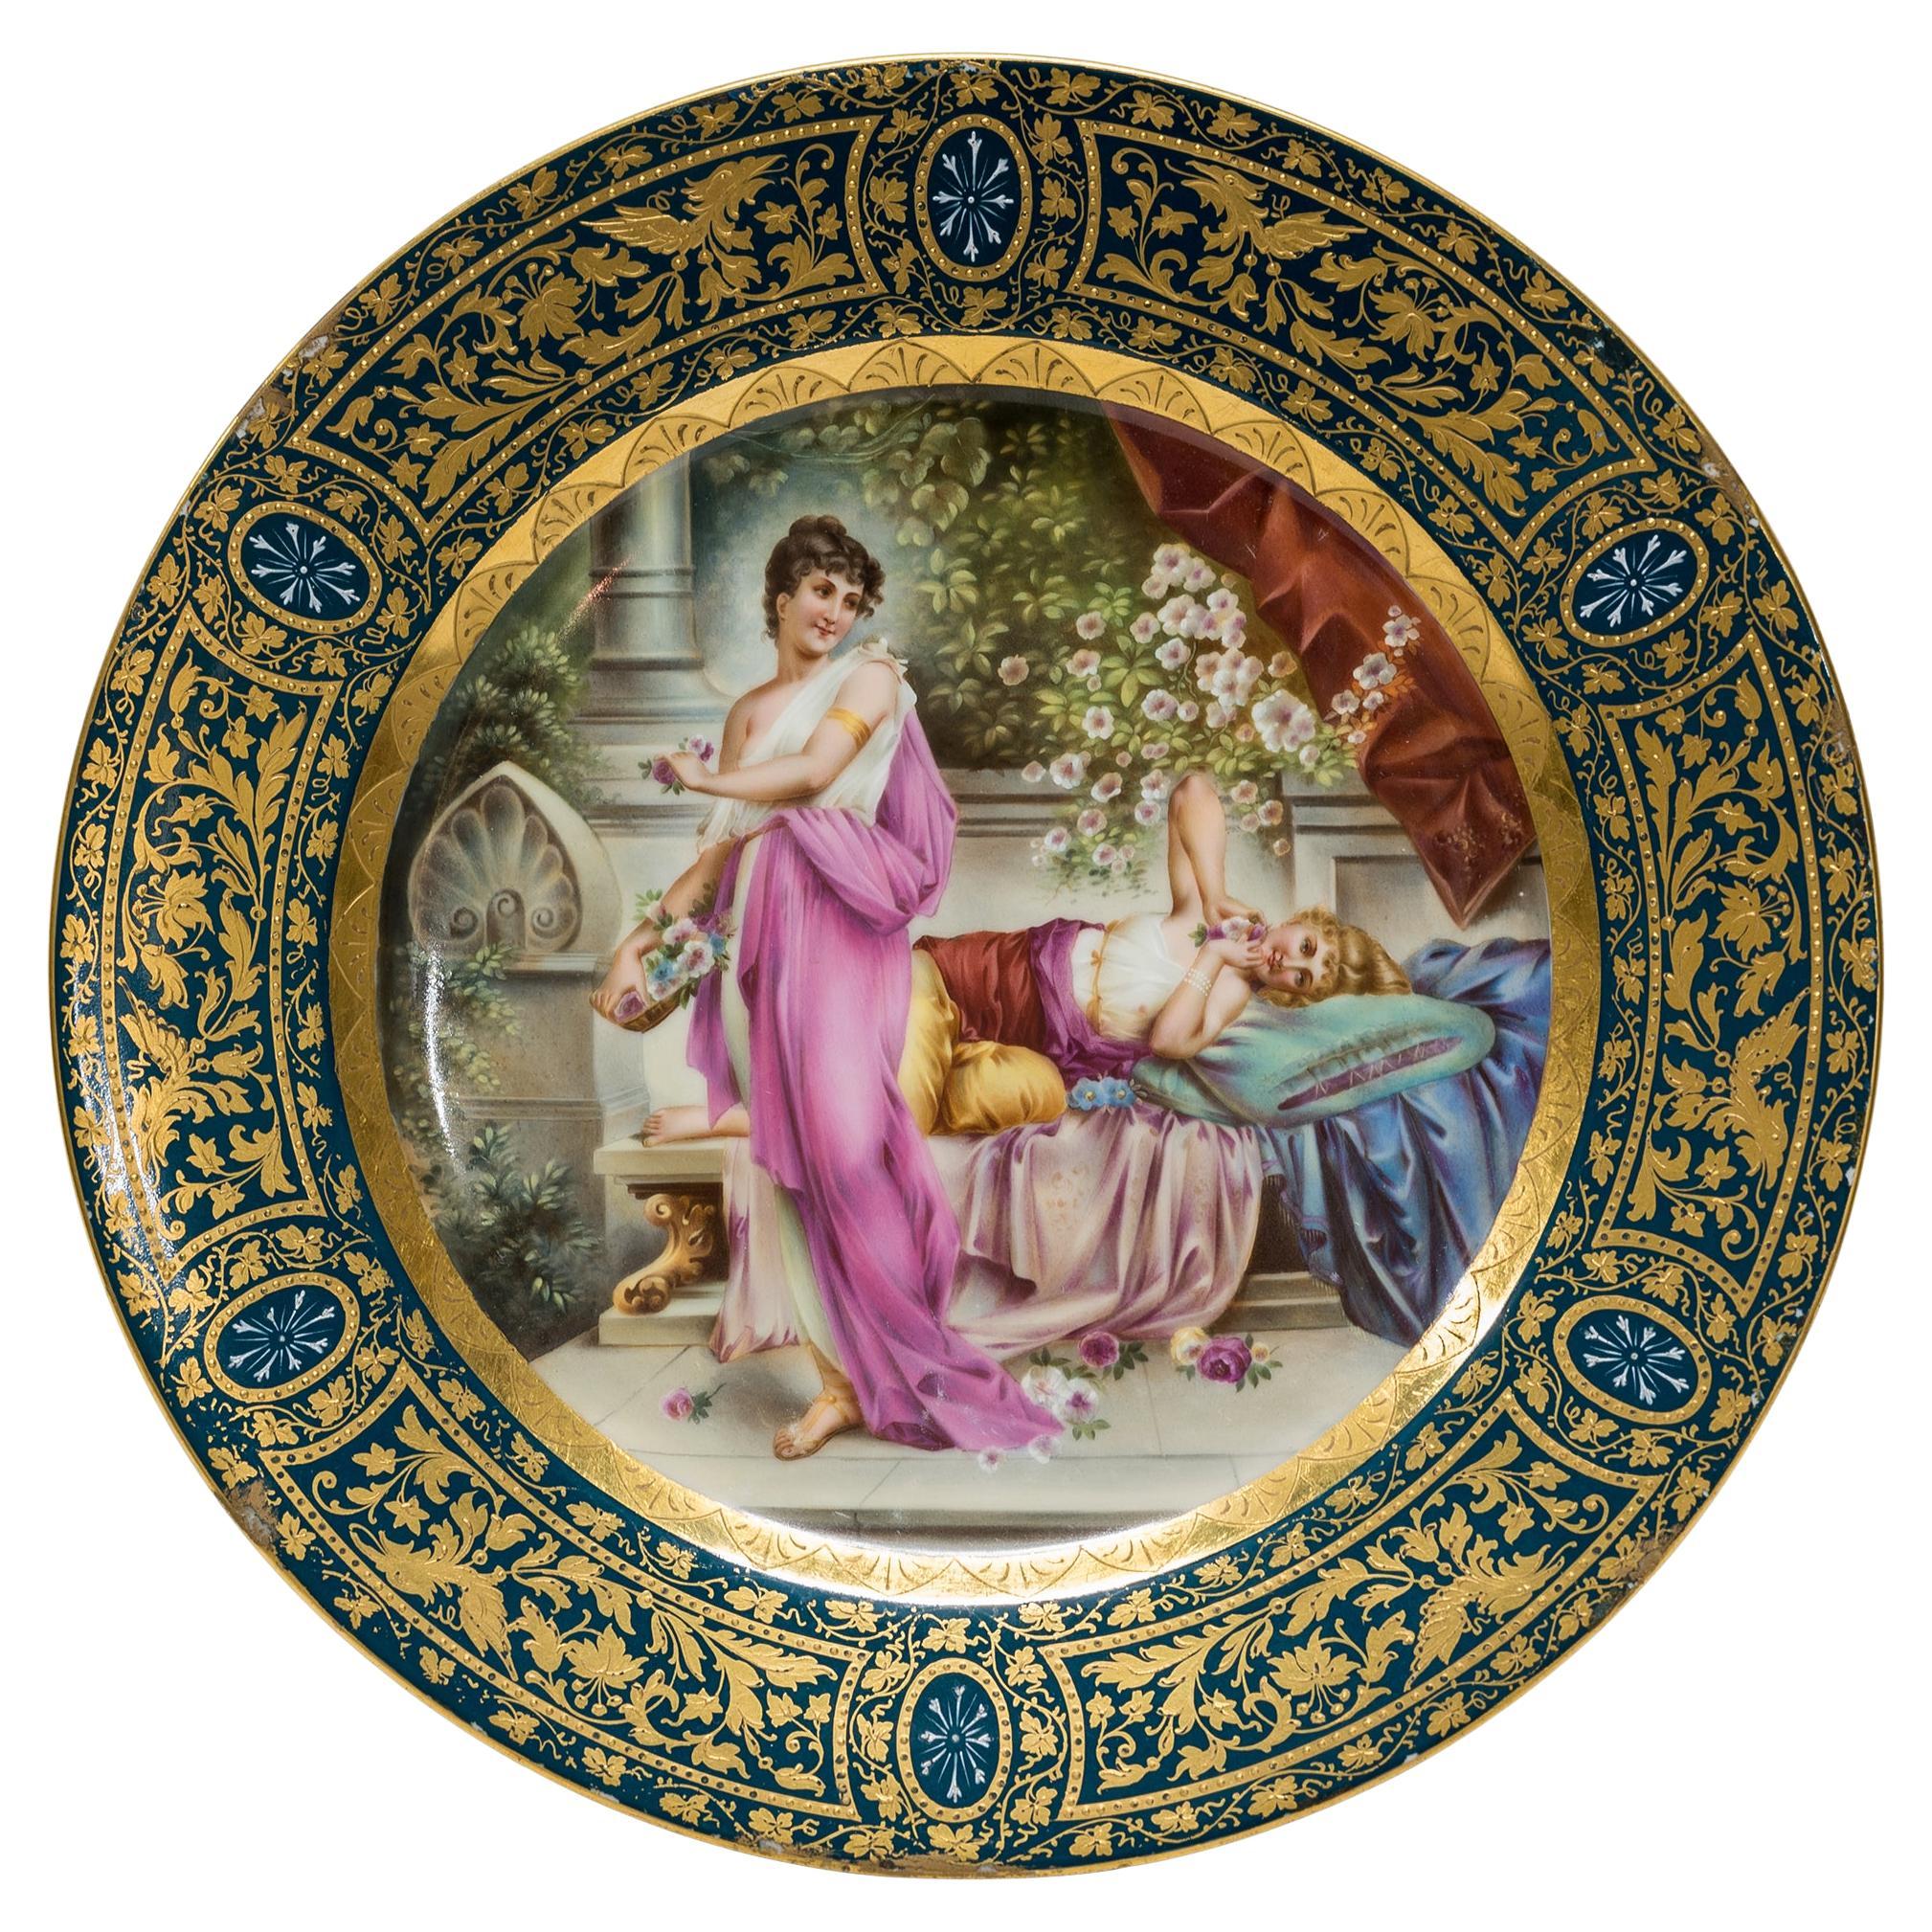 A Fine Quality Royal Vienna Porcelain Gilded Cabinet Plate Depicting Two Beautie